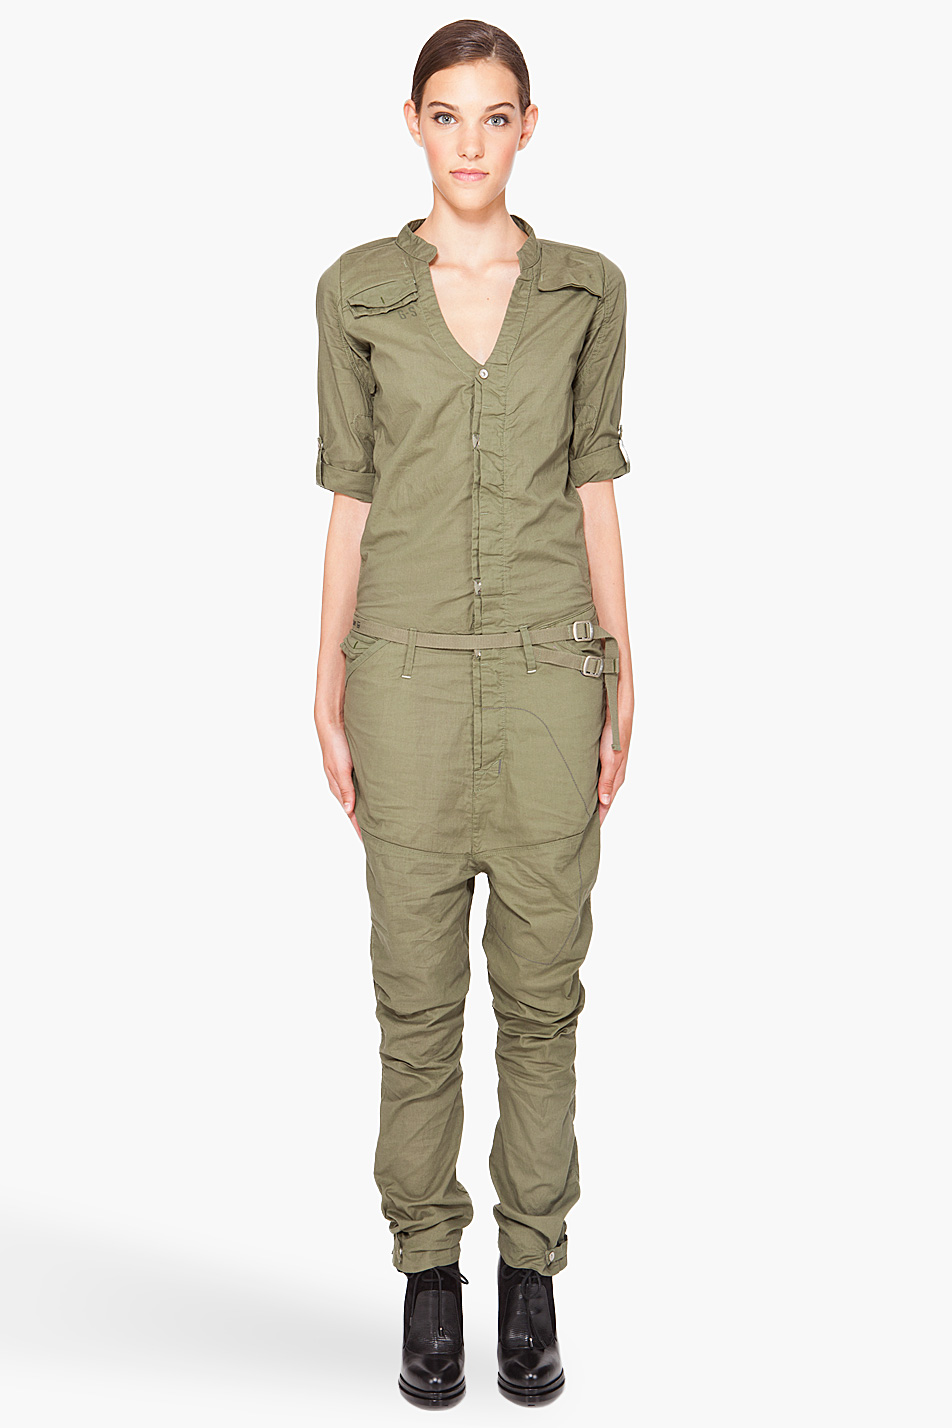 G-Star RAW Laundry Officer Flight Suit in Army (Green) - Lyst